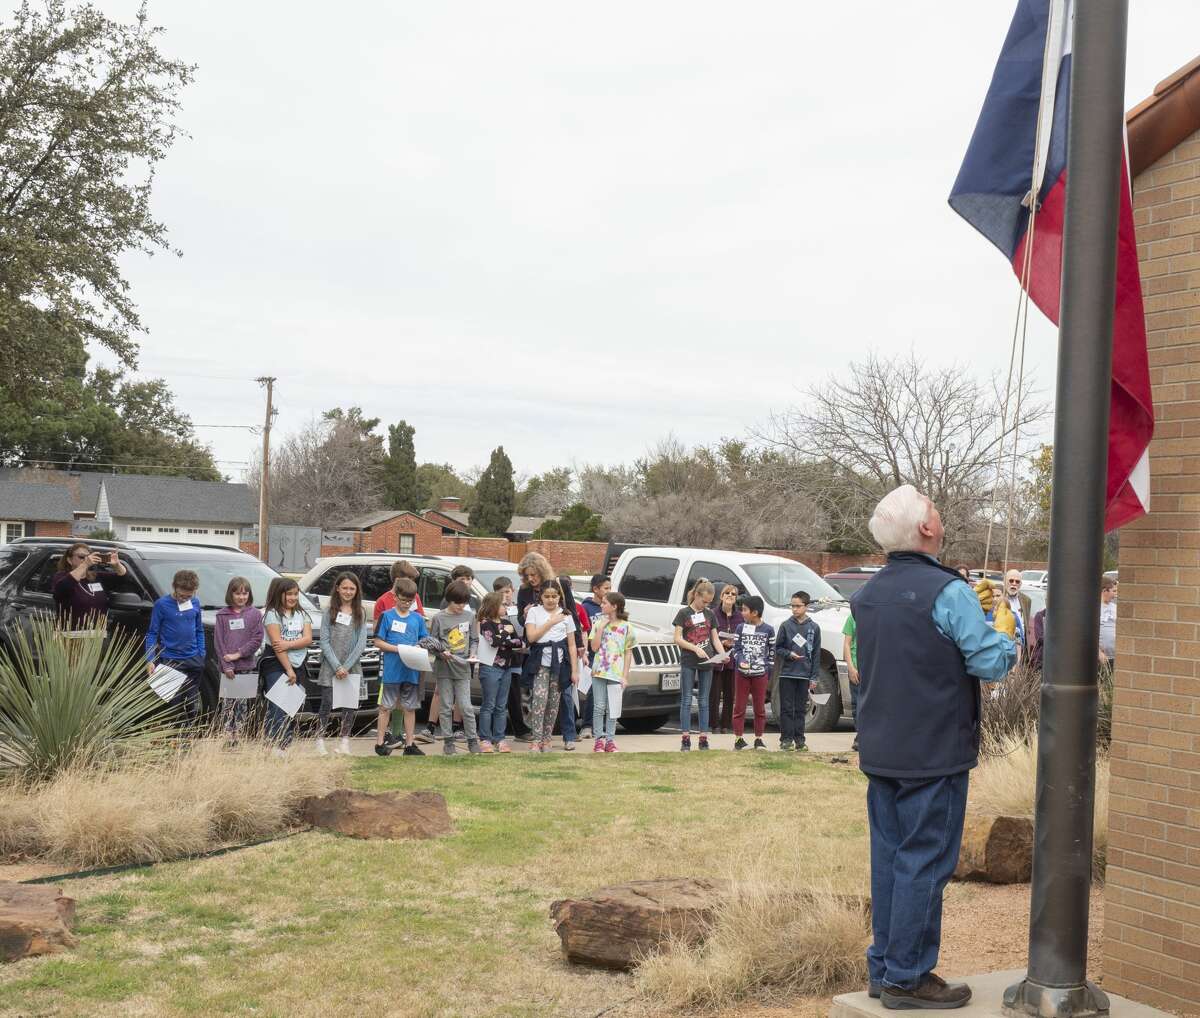 Pat McDaniel raises the Texas Flag 03/02/2020 outside the Haley Library during the Texas Independence Day celebration. Tim Fischer/Reporter-Telegram